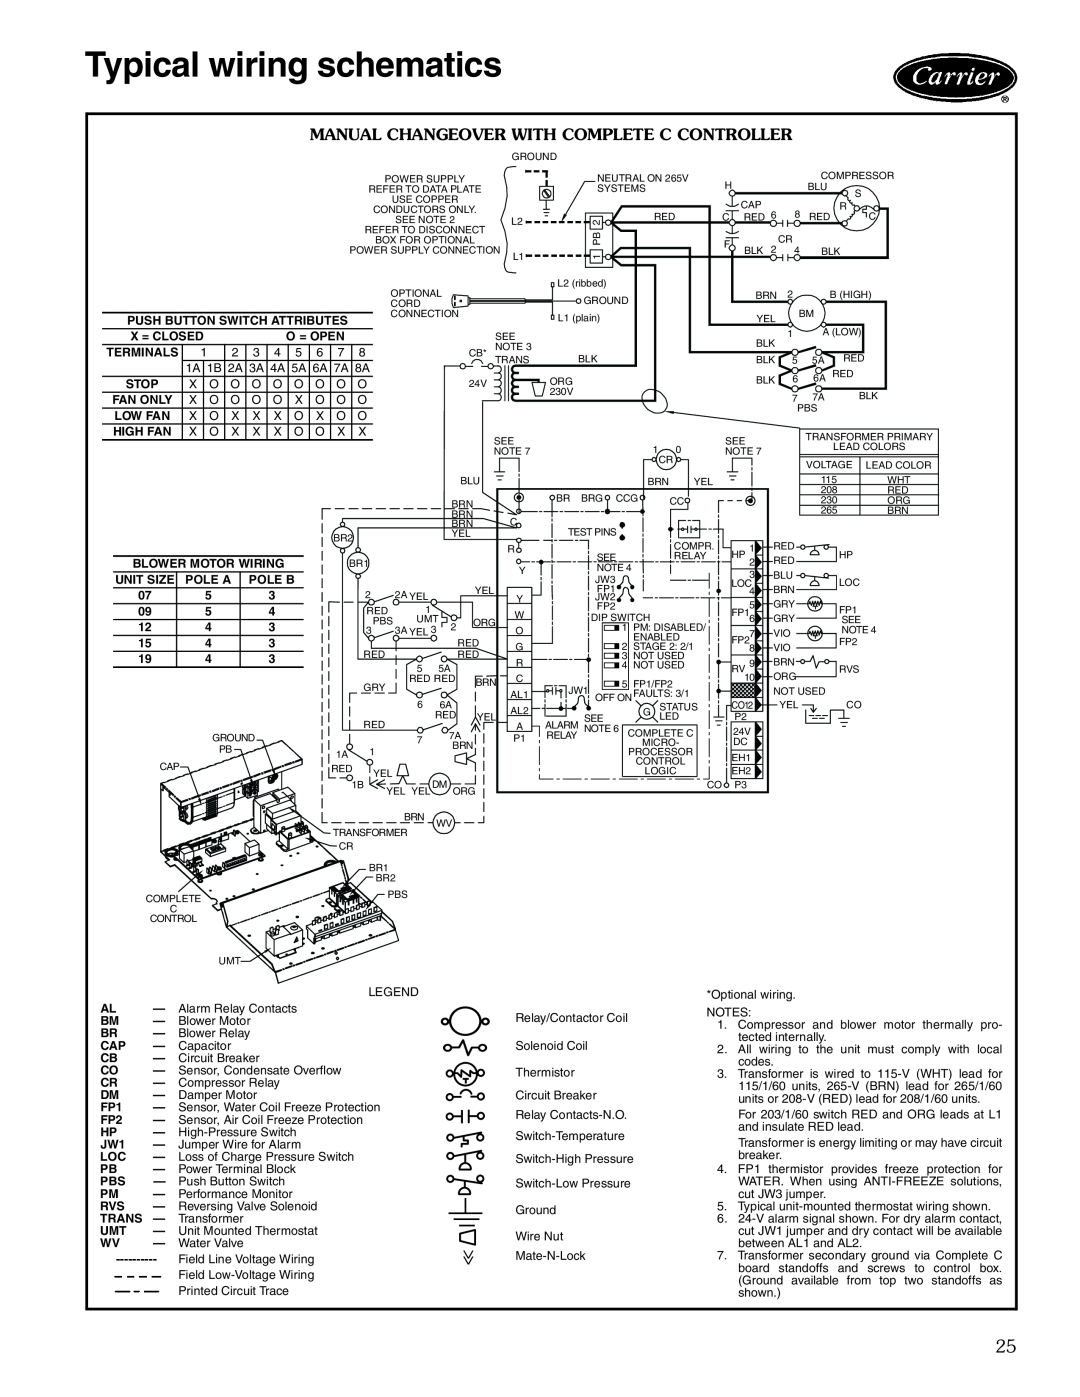 Carrier 50KQL-1PD manual Typical wiring schematics, Manual Changeover With Complete C Controller 